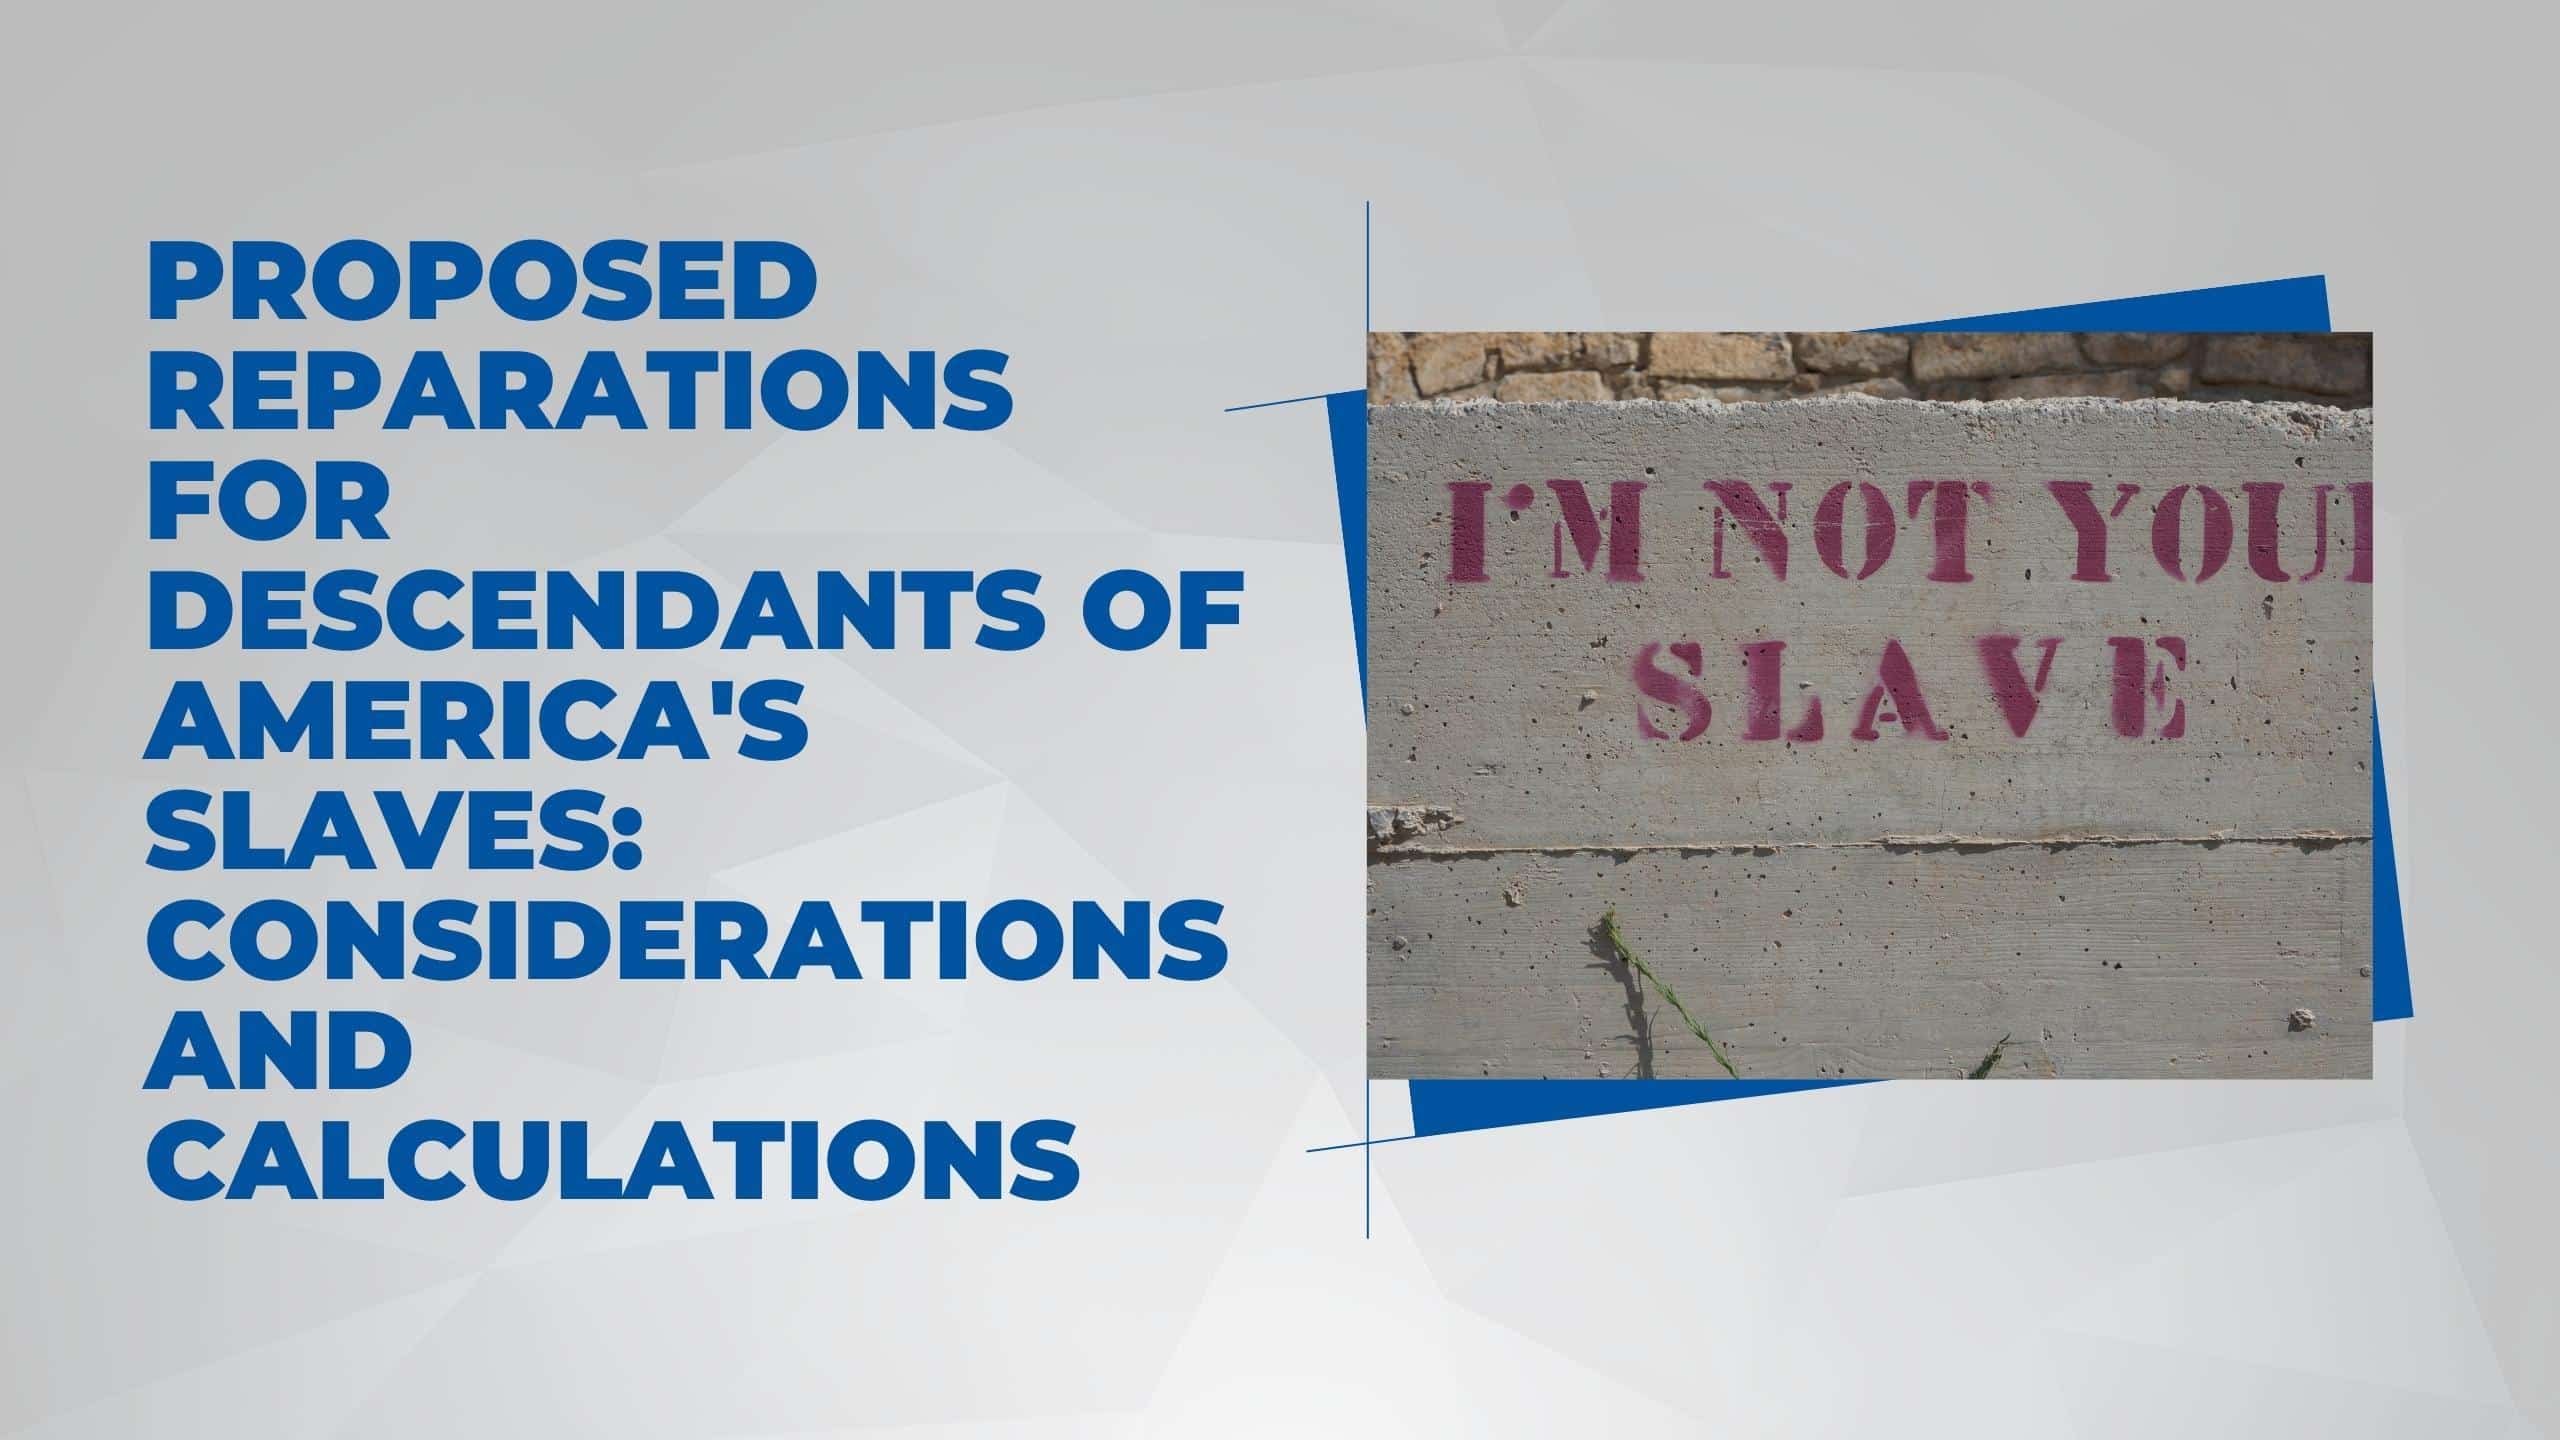 Proposed Reparations for Descendants of America’s Slaves’ Considerations